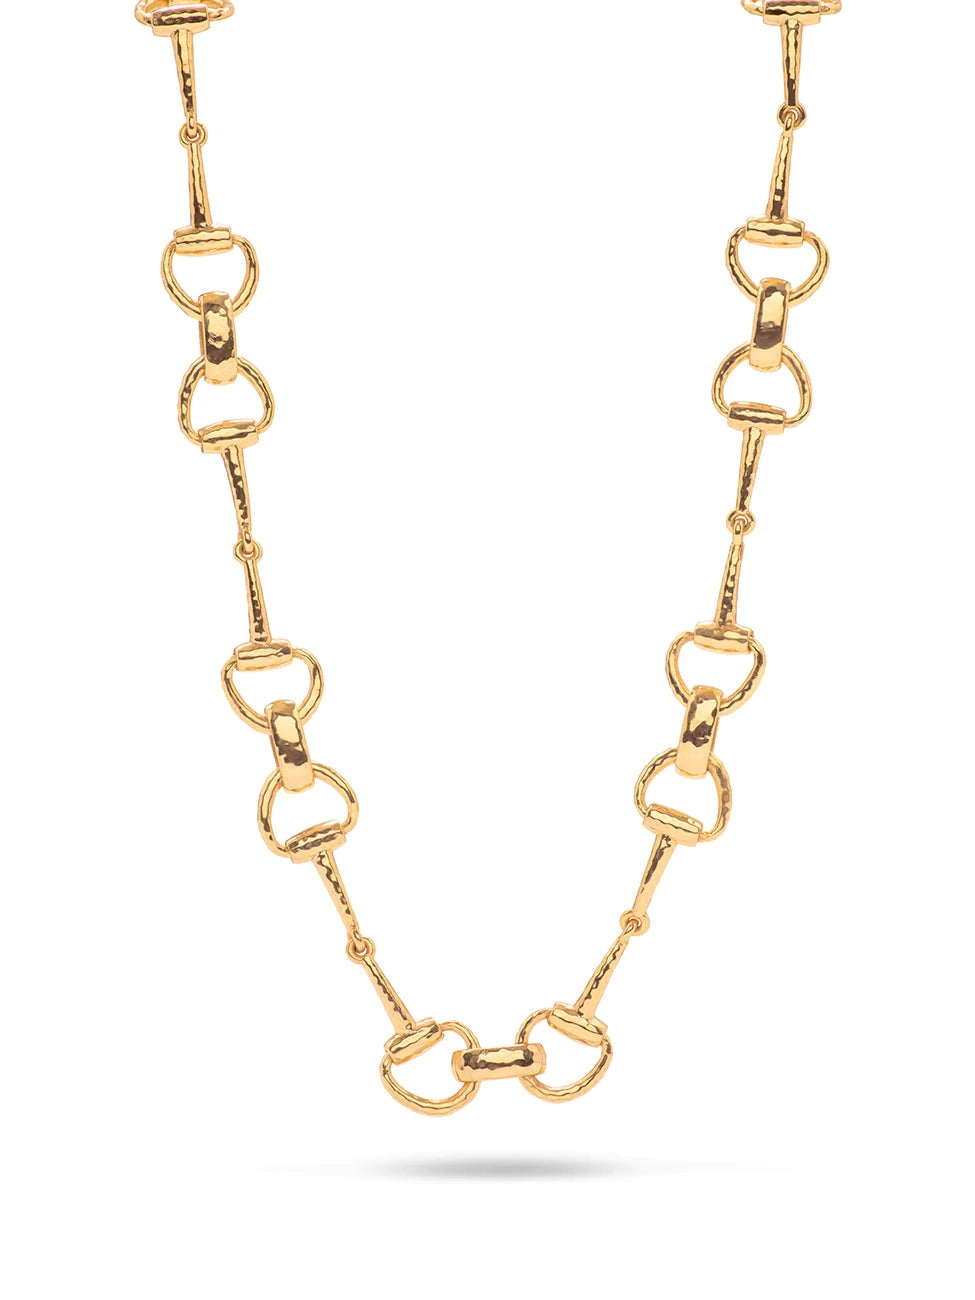 capucine de wulf equestrian snaffle bit 20 inch chain necklace in gold-detail view